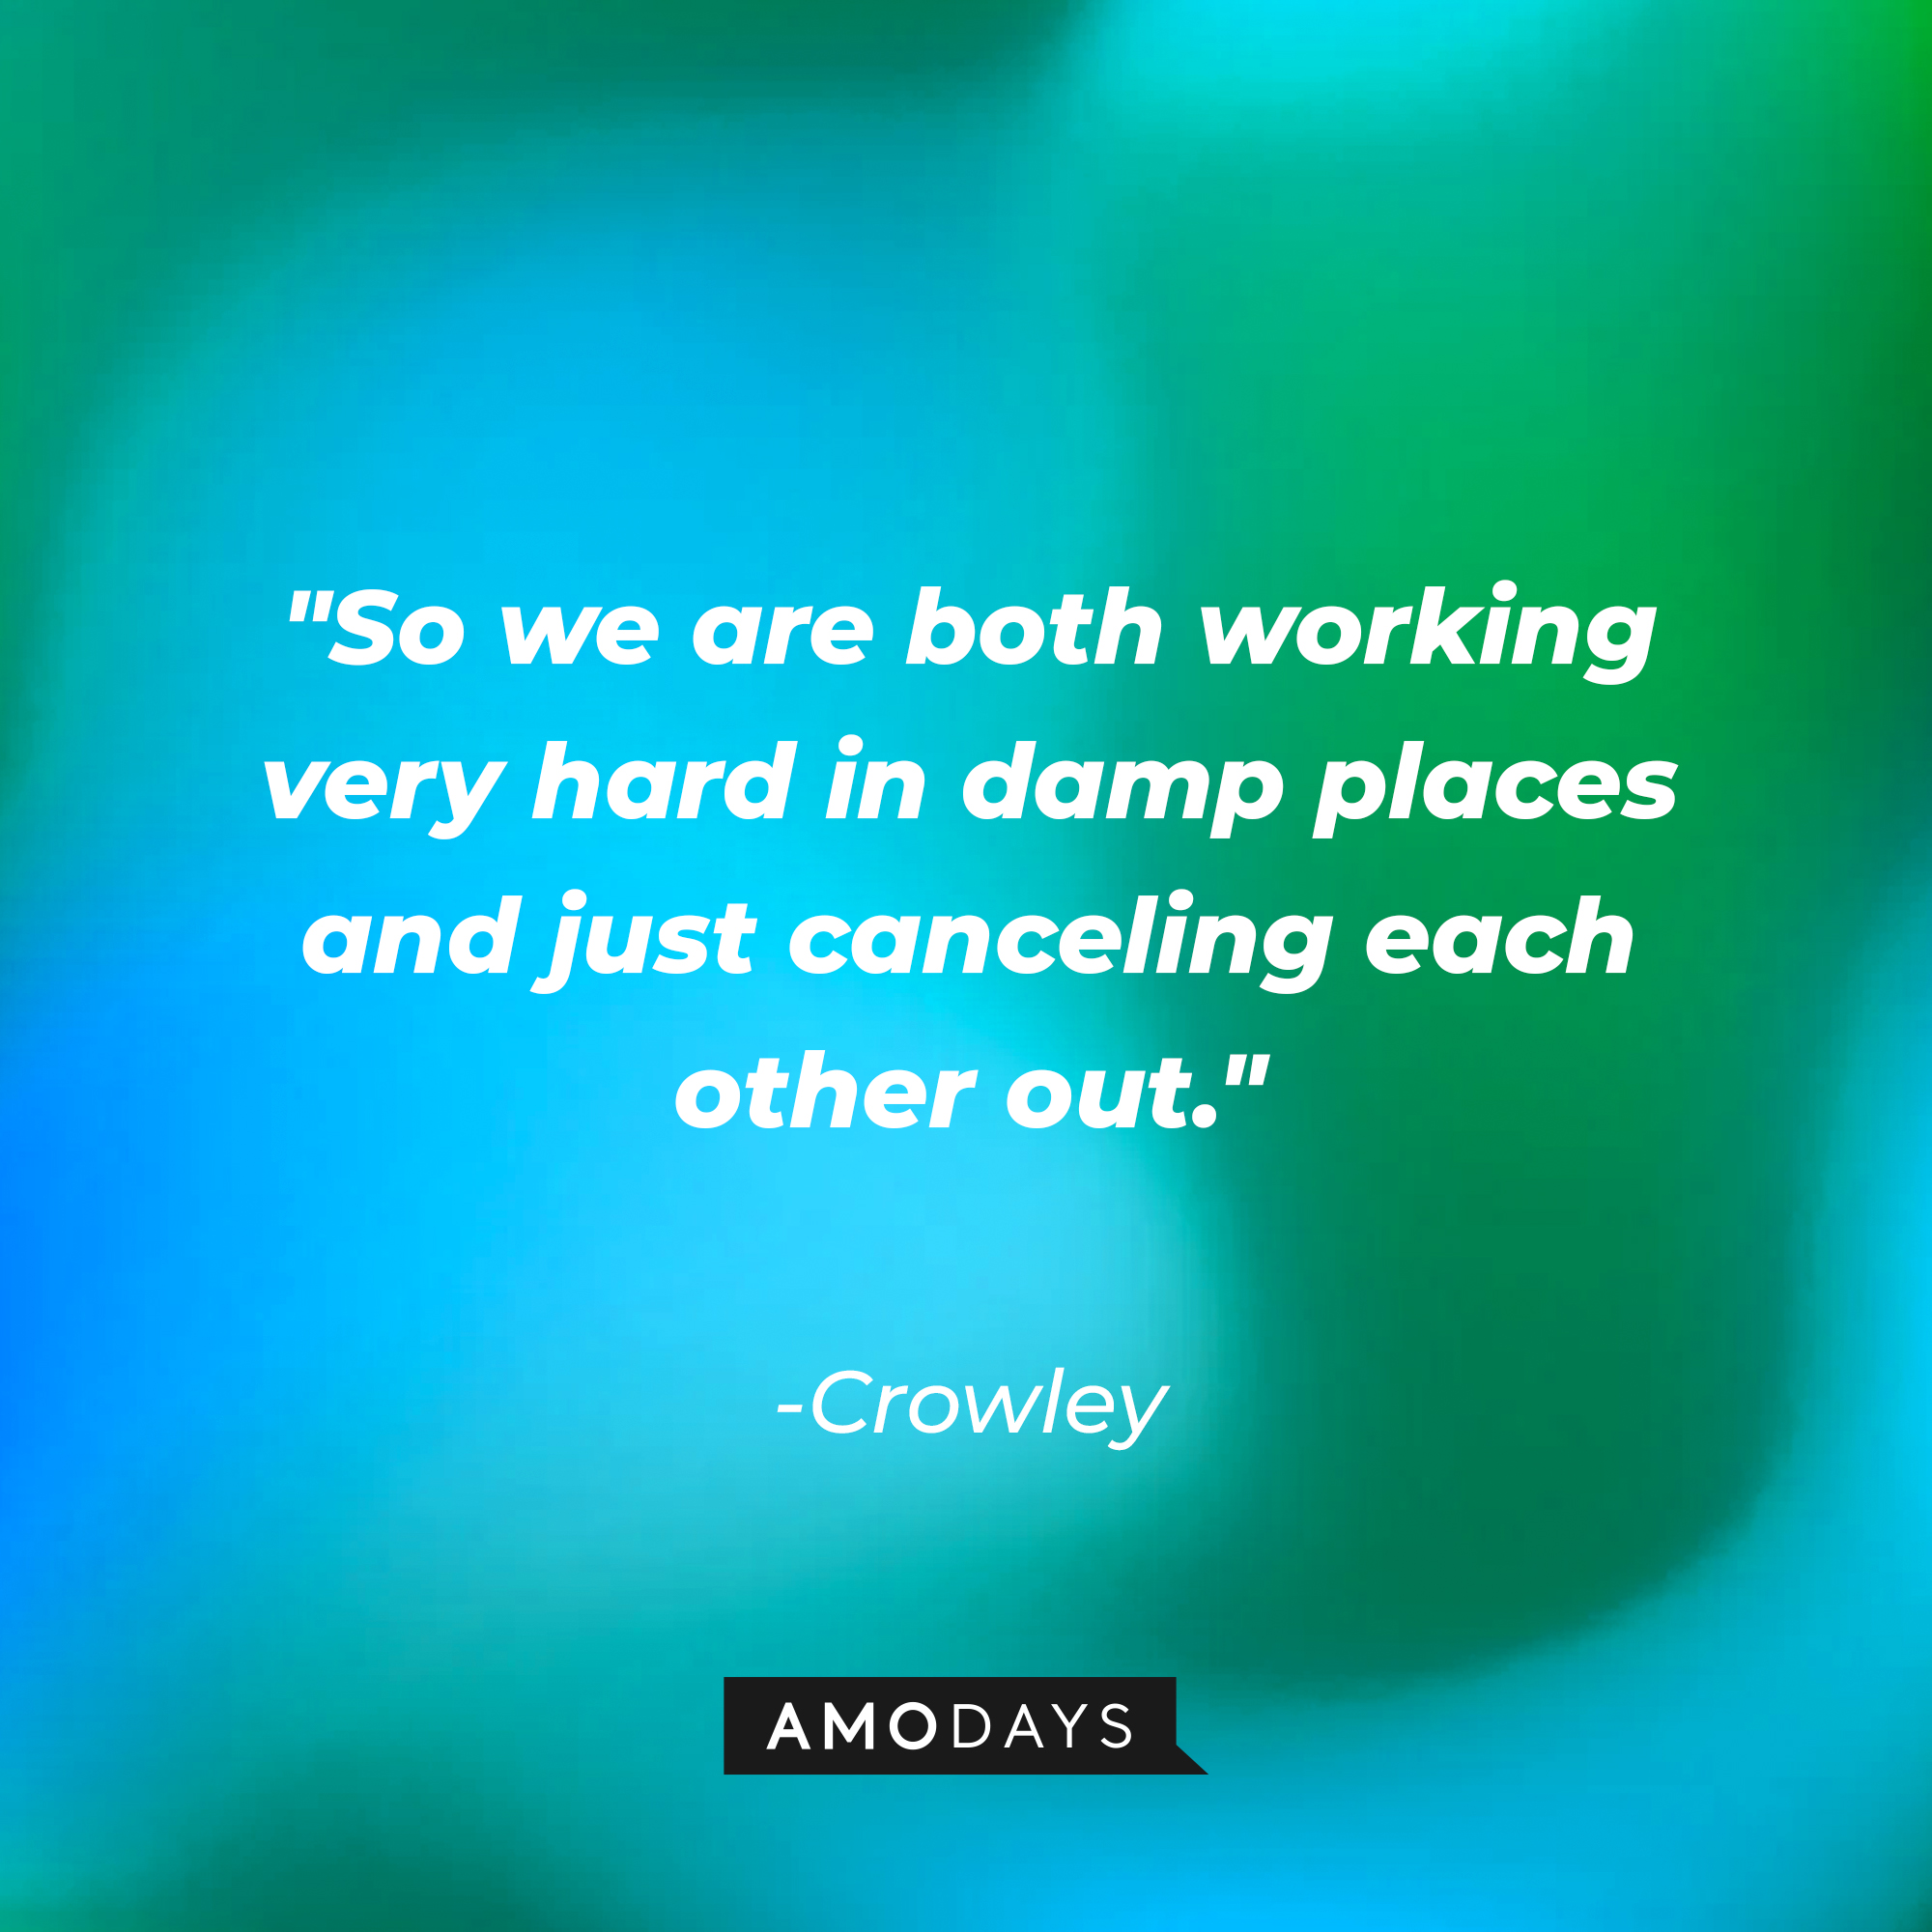 Crowley's quote: "So we are both working very hard in damp places and just canceling each other out." | Source: AmoDays